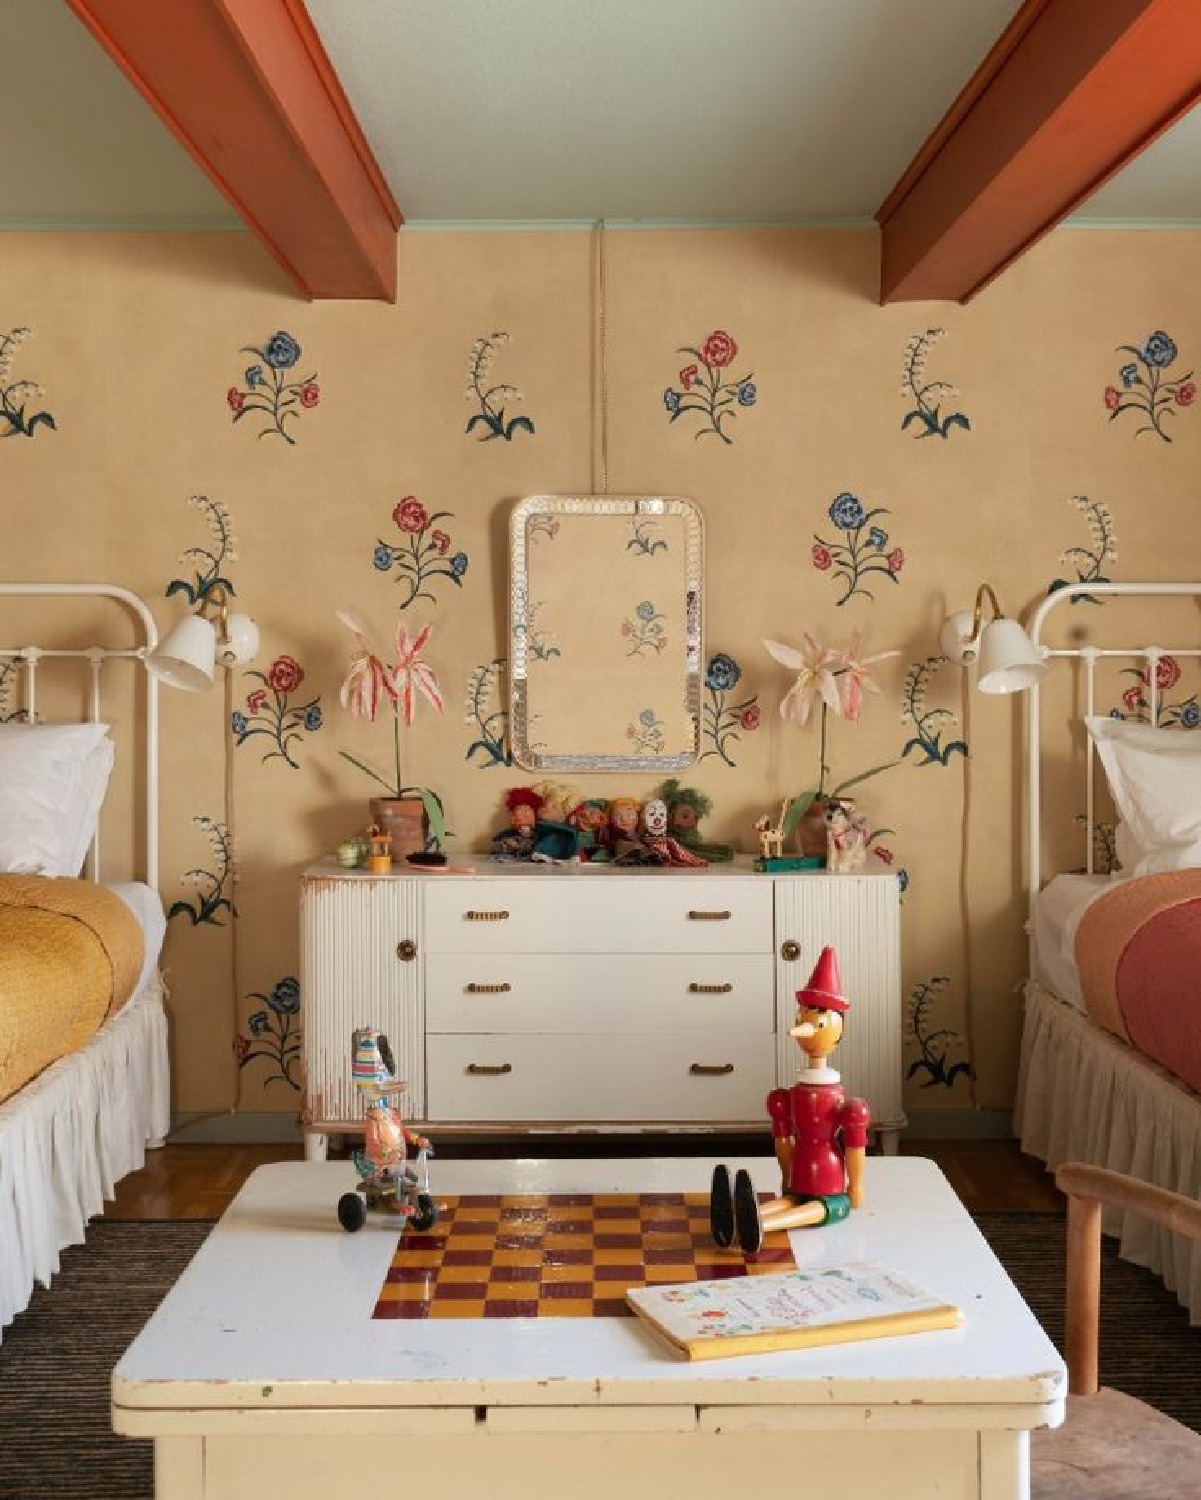 De Gournay large scale floral hand-embroidered wallcovering in children's room - Beata Heuman; photo: de Gournay. #swedishfarmhouse